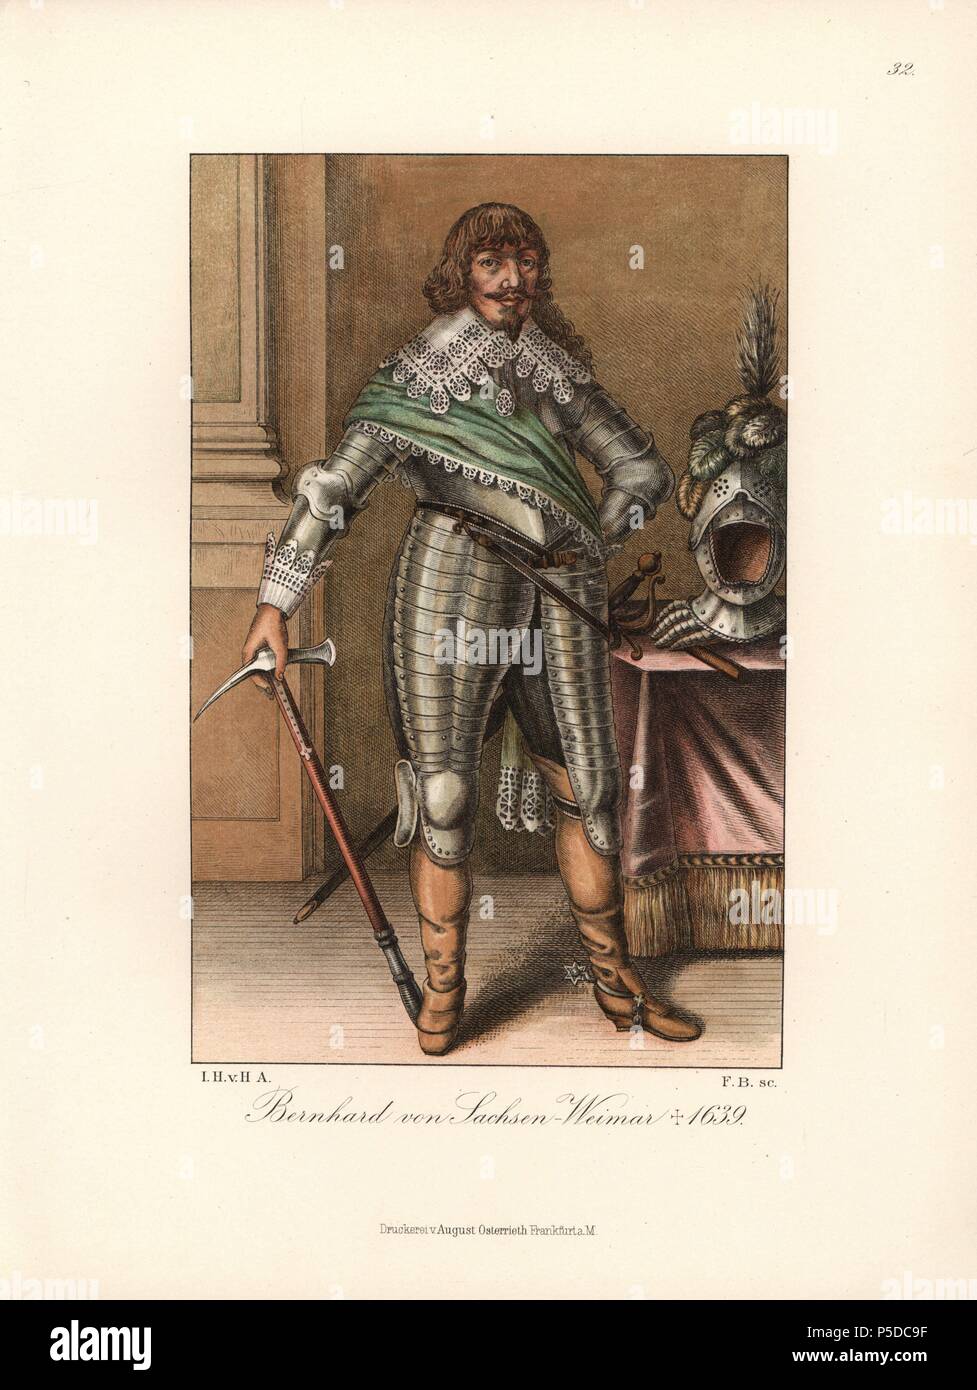 Duke Bernard of Saxe-Weimar, died 1639, general who fought in the 30 Year War. Chromolithograph from Hefner-Alteneck's 'Costumes, Artworks and Appliances from the Middle Ages to the 17th Century,' Frankfurt, 1889. Illustration by Dr. Jakob Heinrich von Hefner-Alteneck, lithographed by FB, and published by Heinrich Keller. Dr. Hefner-Alteneck (1811 - 1903) was a German museum curator, archaeologist, art historian, illustrator and etcher. Stock Photo